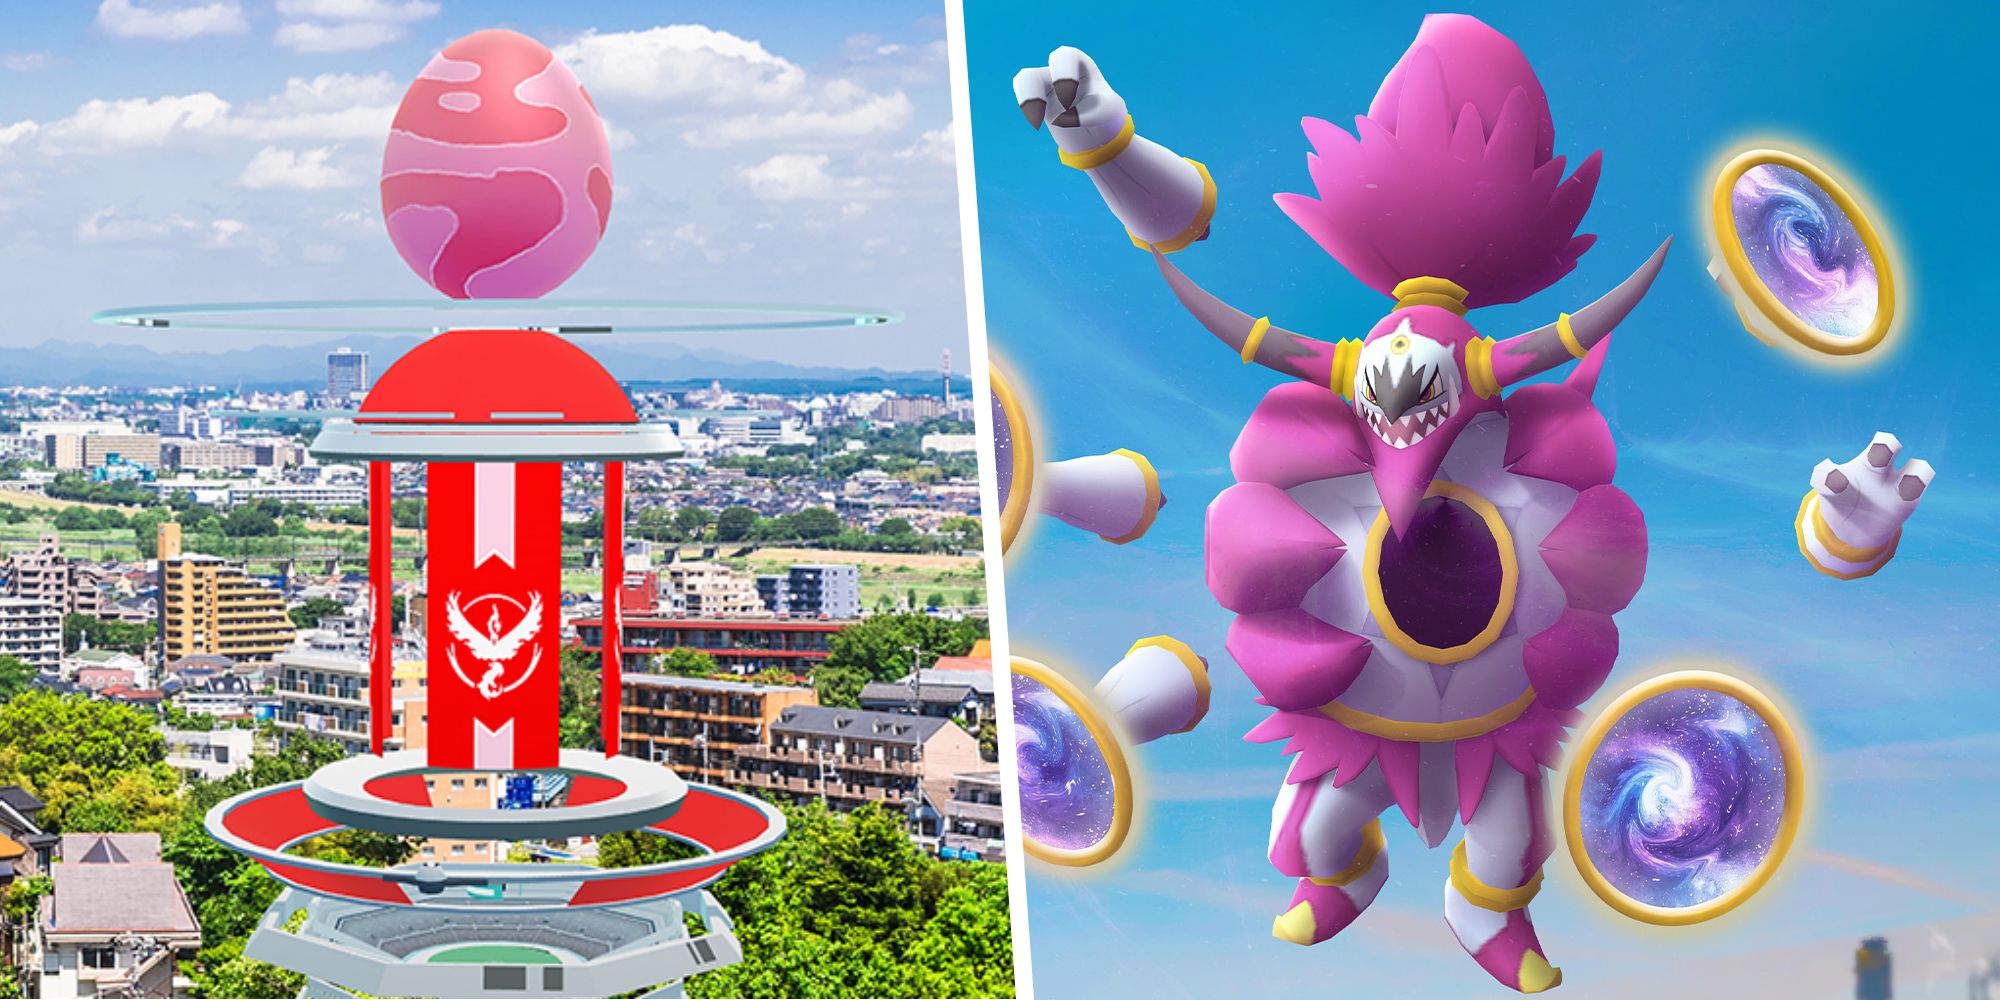 Image of a Pokemon Go Raid in a city split with an image of Hoopa Unbound from Pokemon